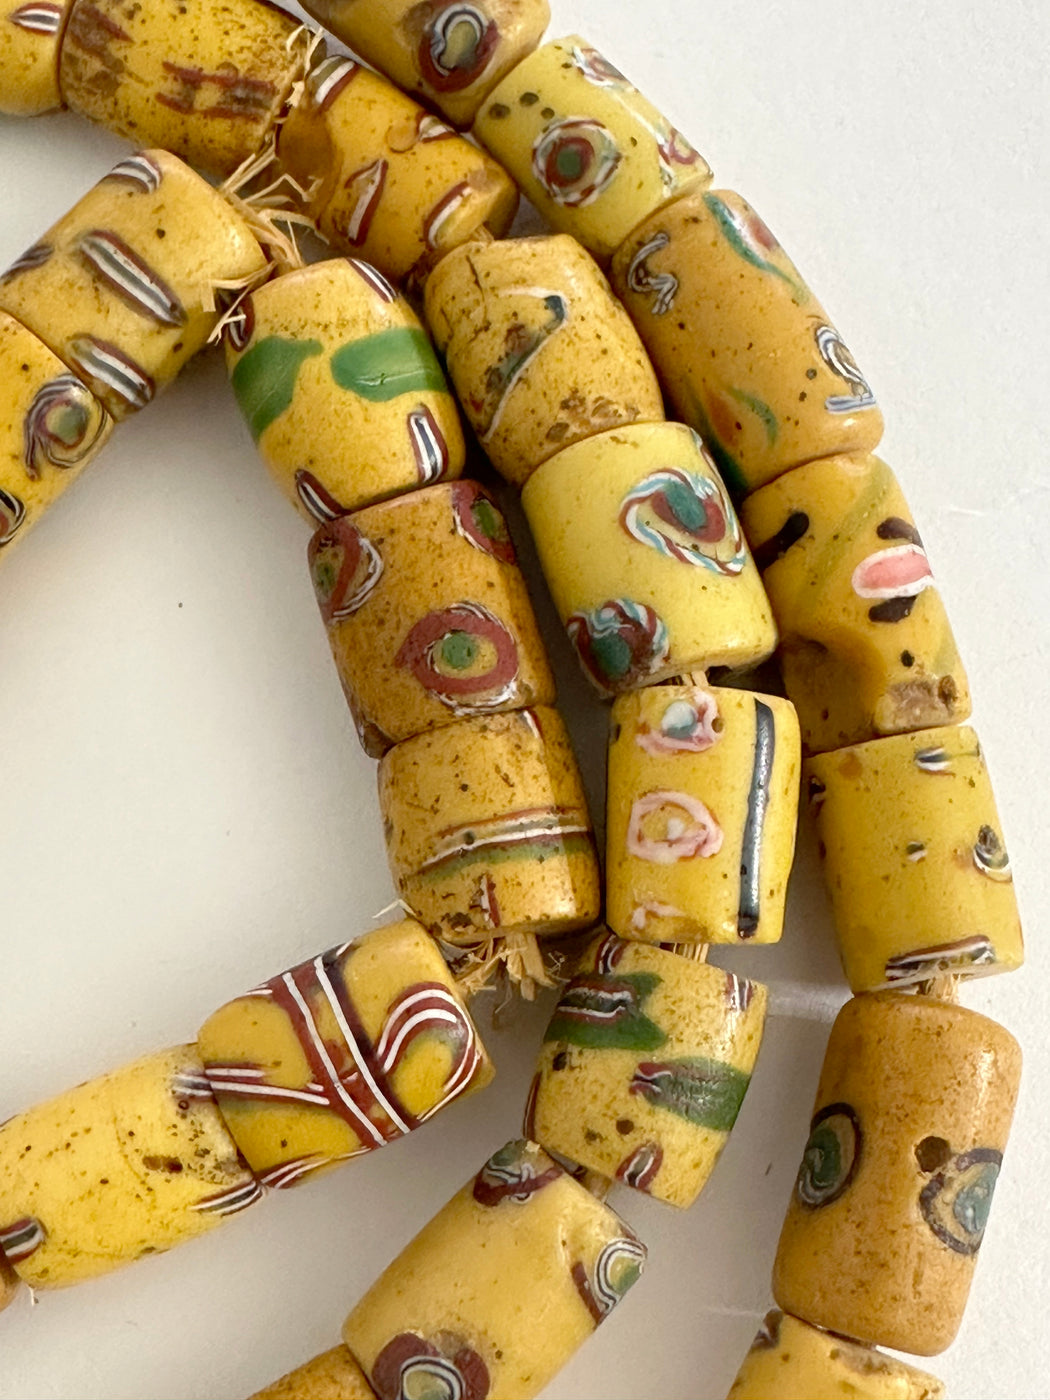 Antique Venetian Trade Beads 64 Yellow Beads from Africa